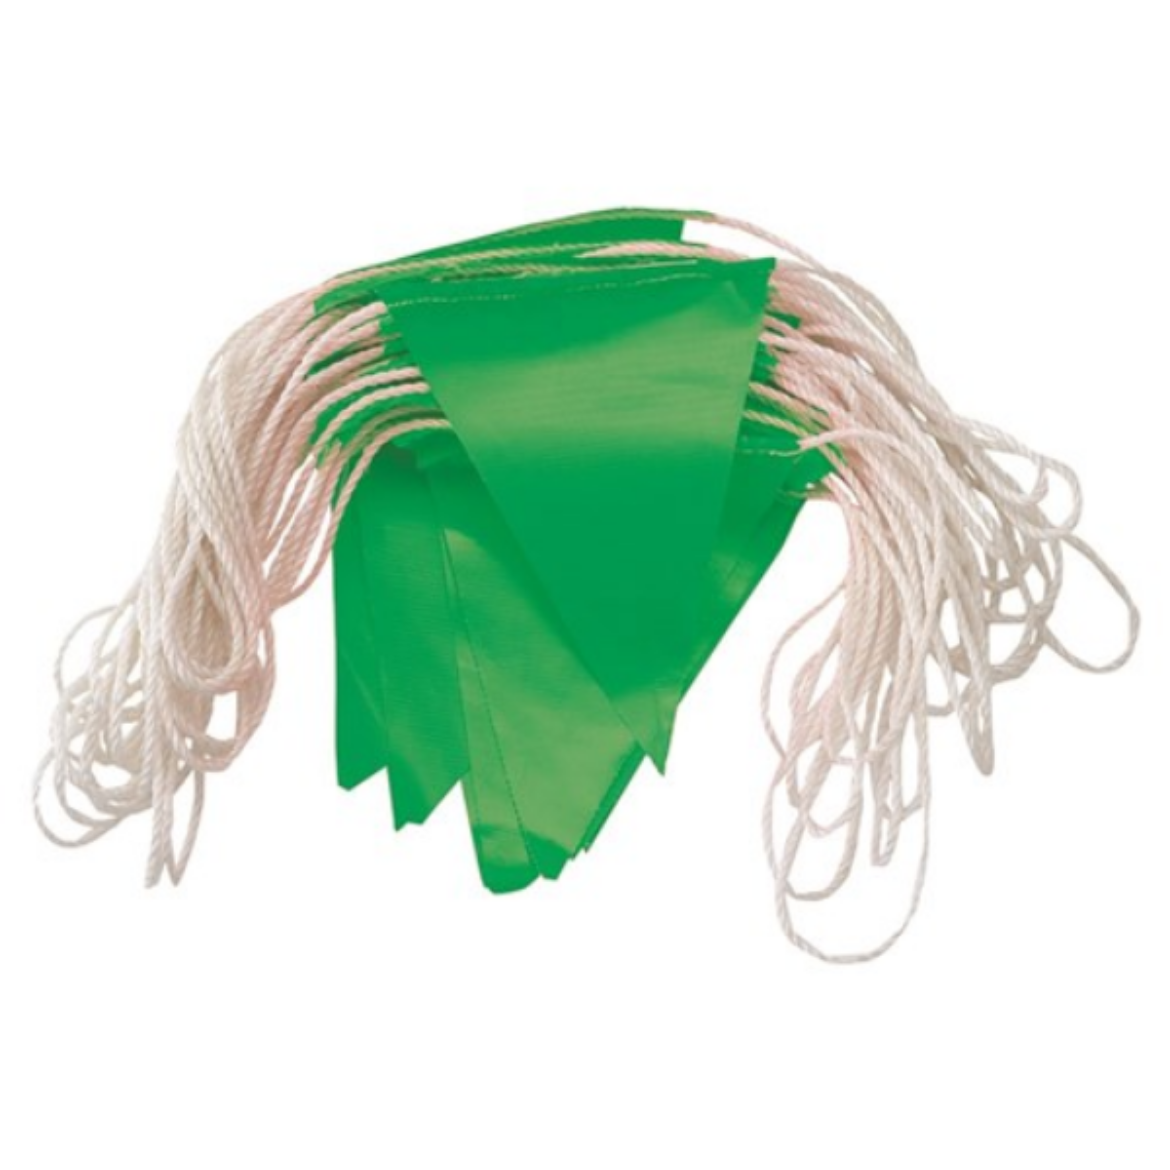 Picture of ORANGE PVC FLAG BUNTING - DAY USE, GREEN FLAGS - 30M